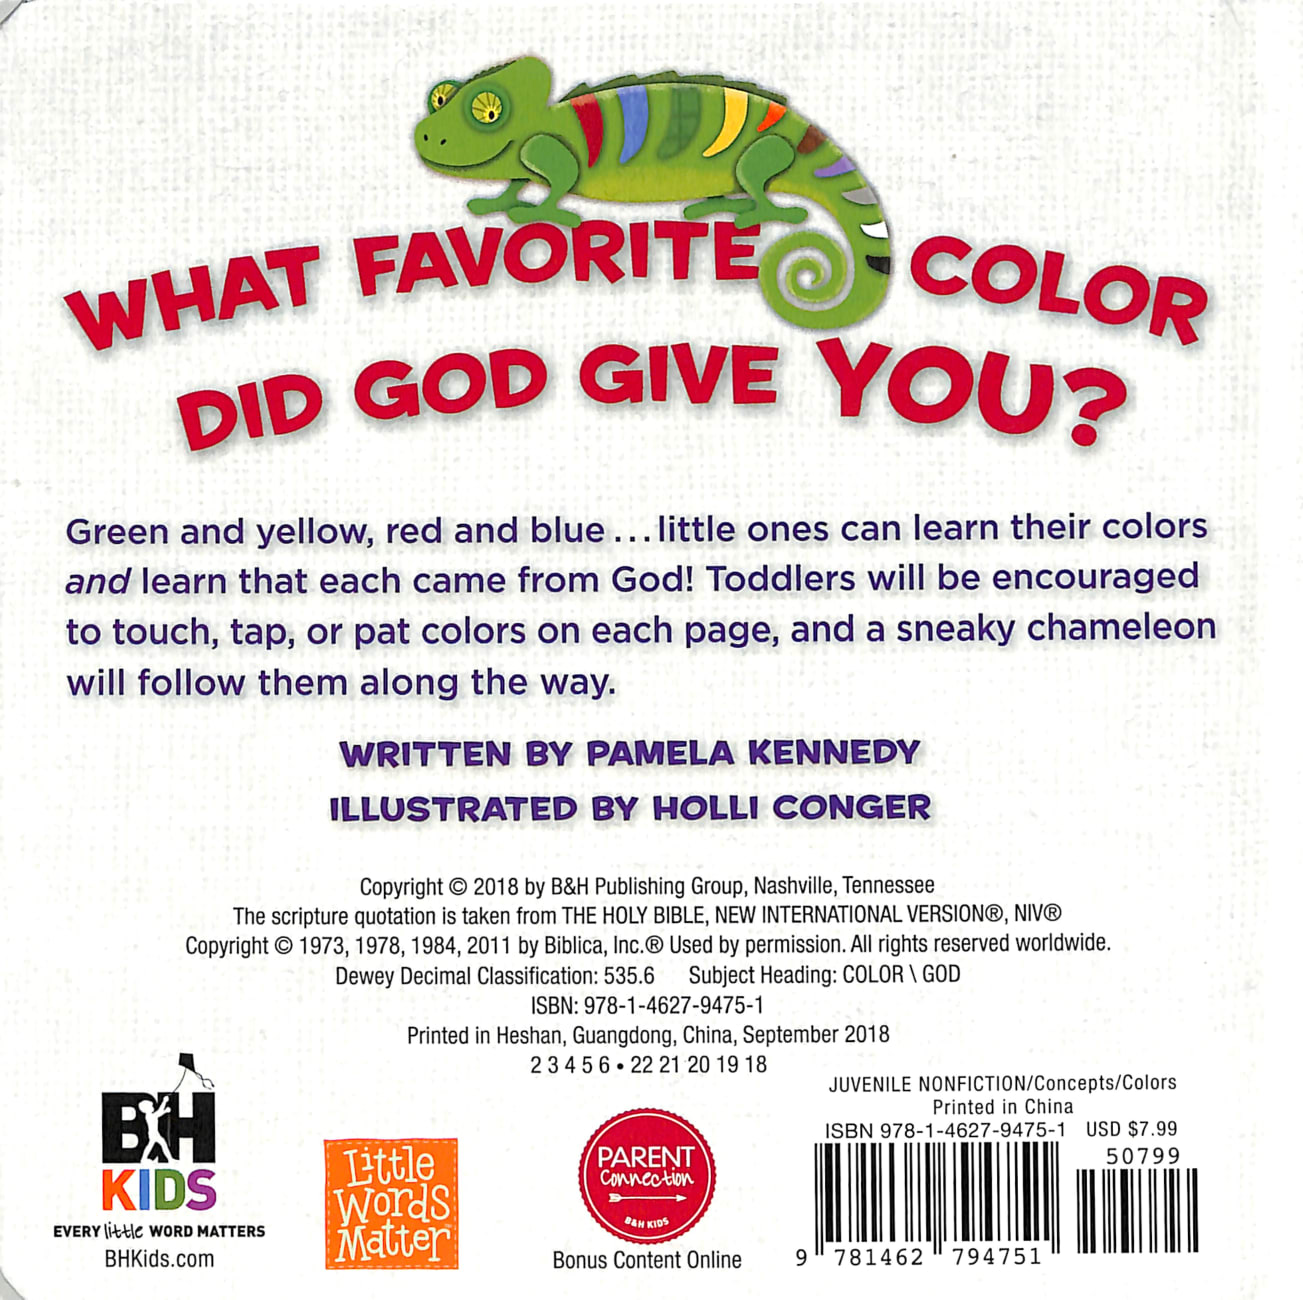 All the Colors That I See (Little Words Matter Series) Board Book